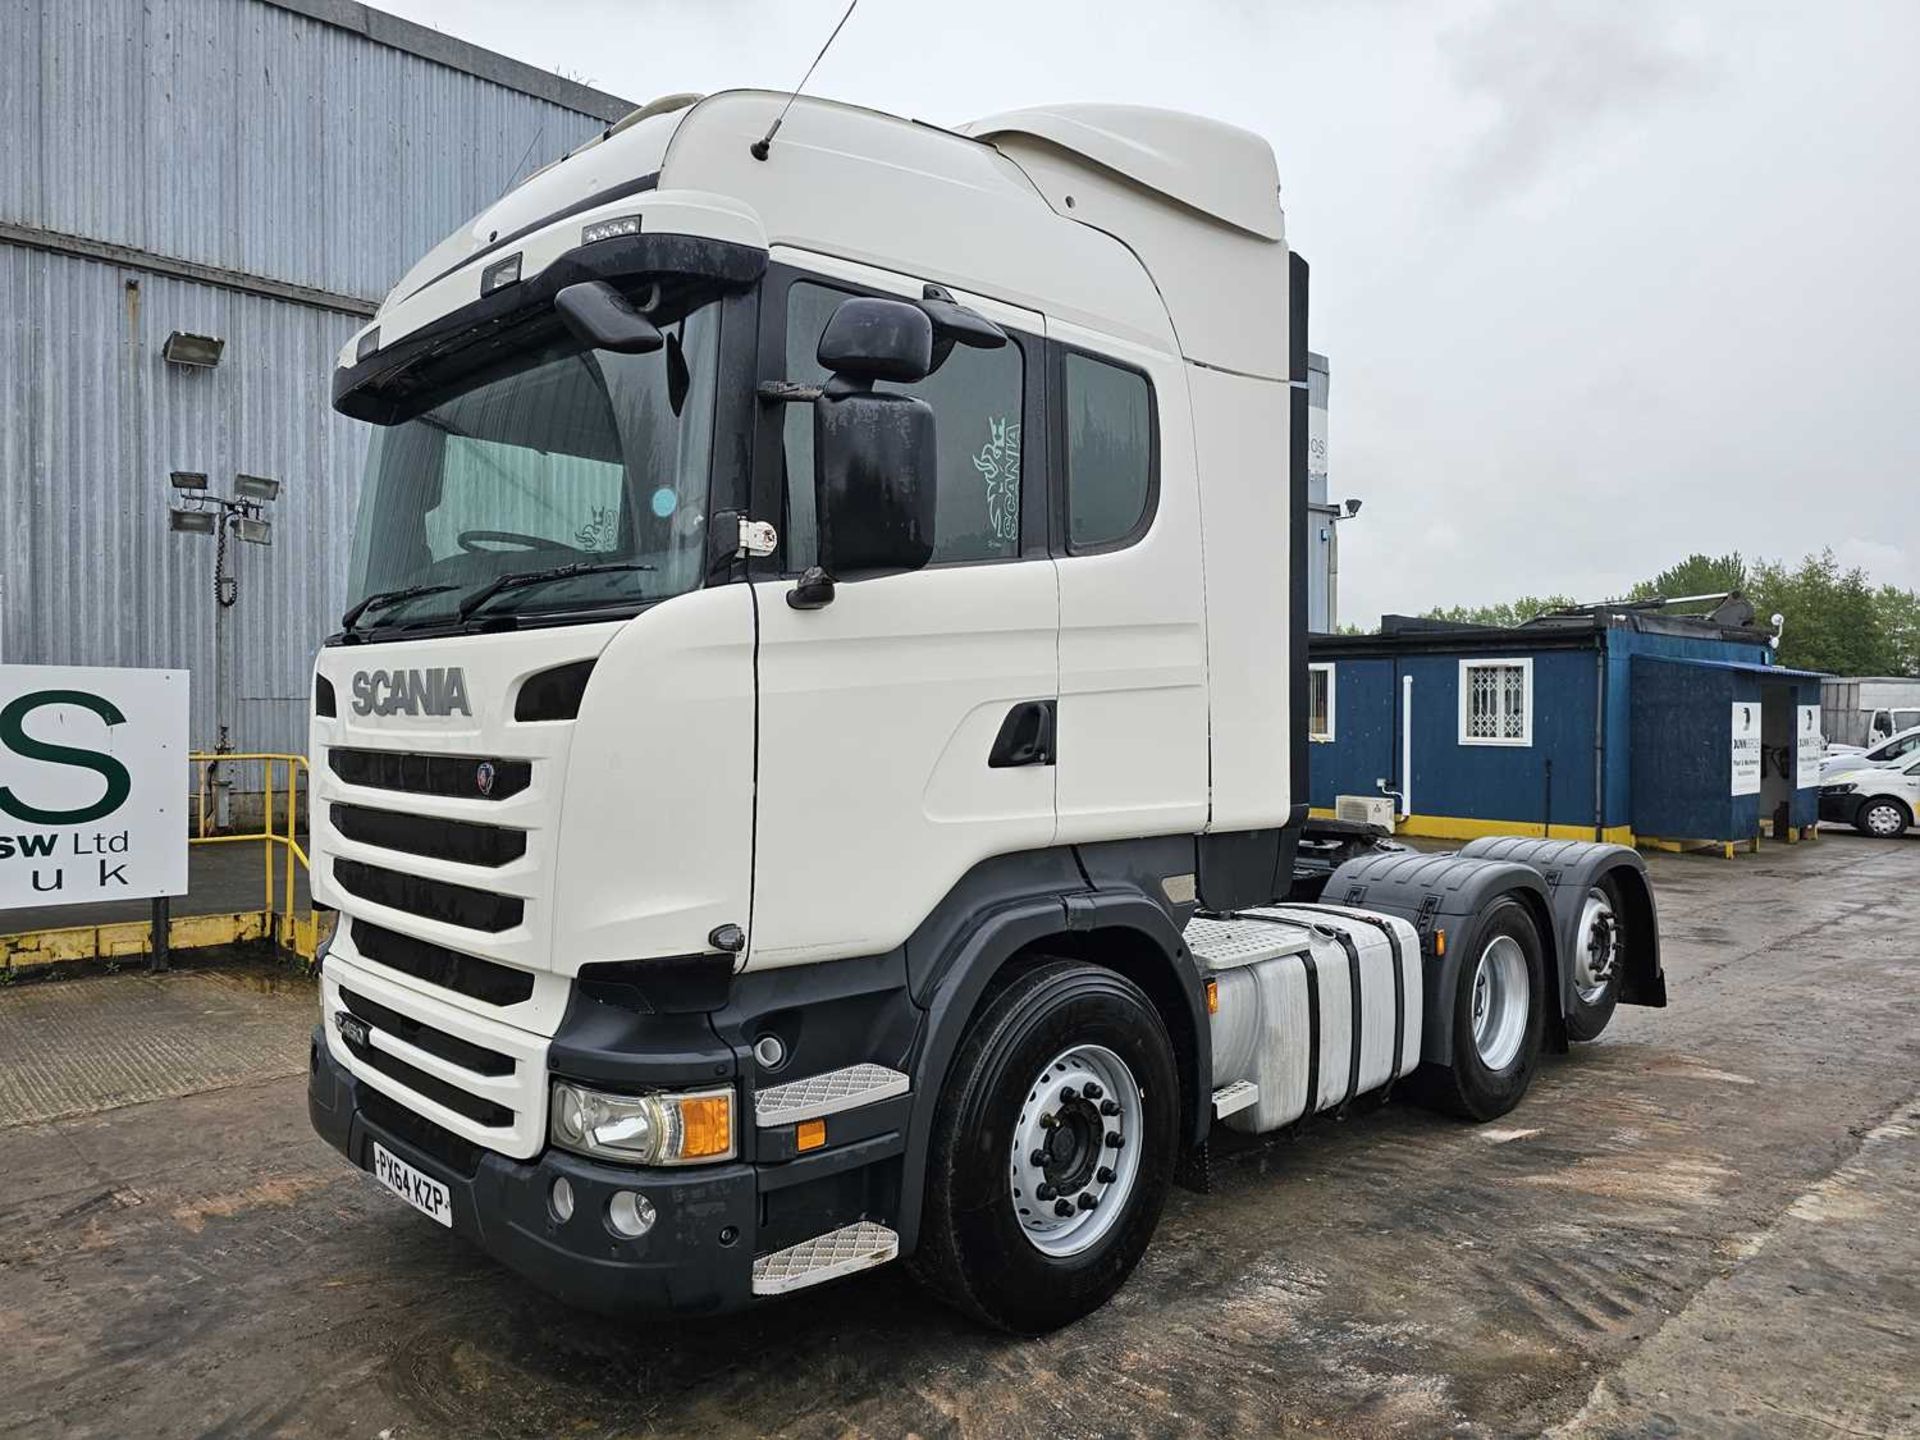 2014 Scania R450 6x2 Rear Lift, Tipping Gear, Blind Spot Camera, A/C, Automatic Gearbox